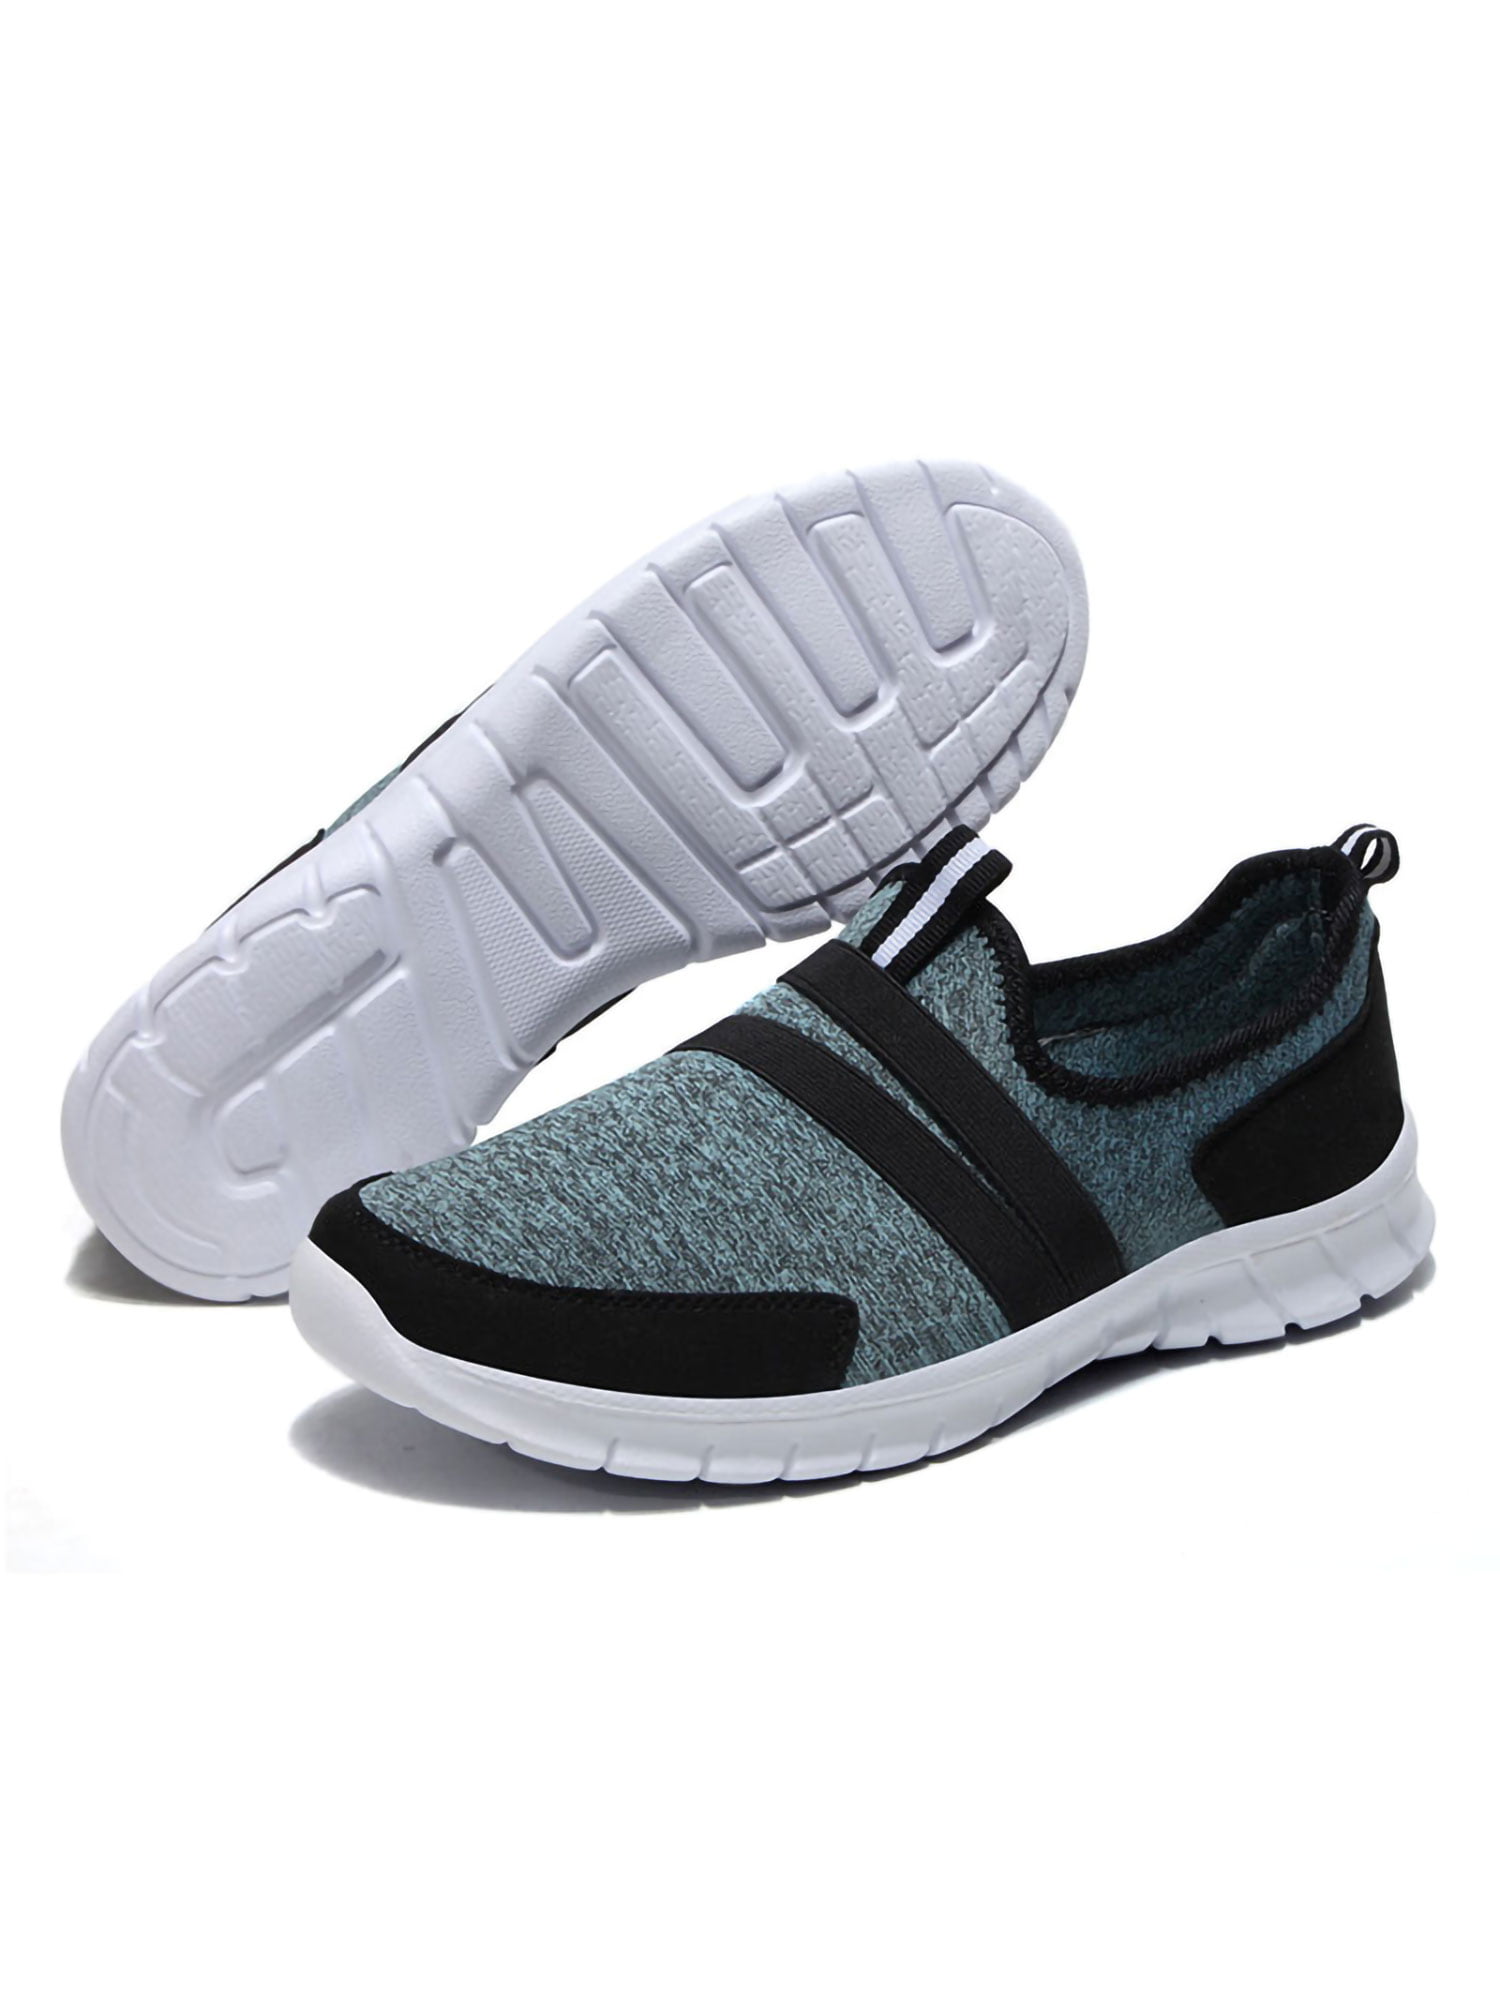 Women Sneakers Athletic Shoes Casual Walking Outdoor Jogging Running Sport Shoes 